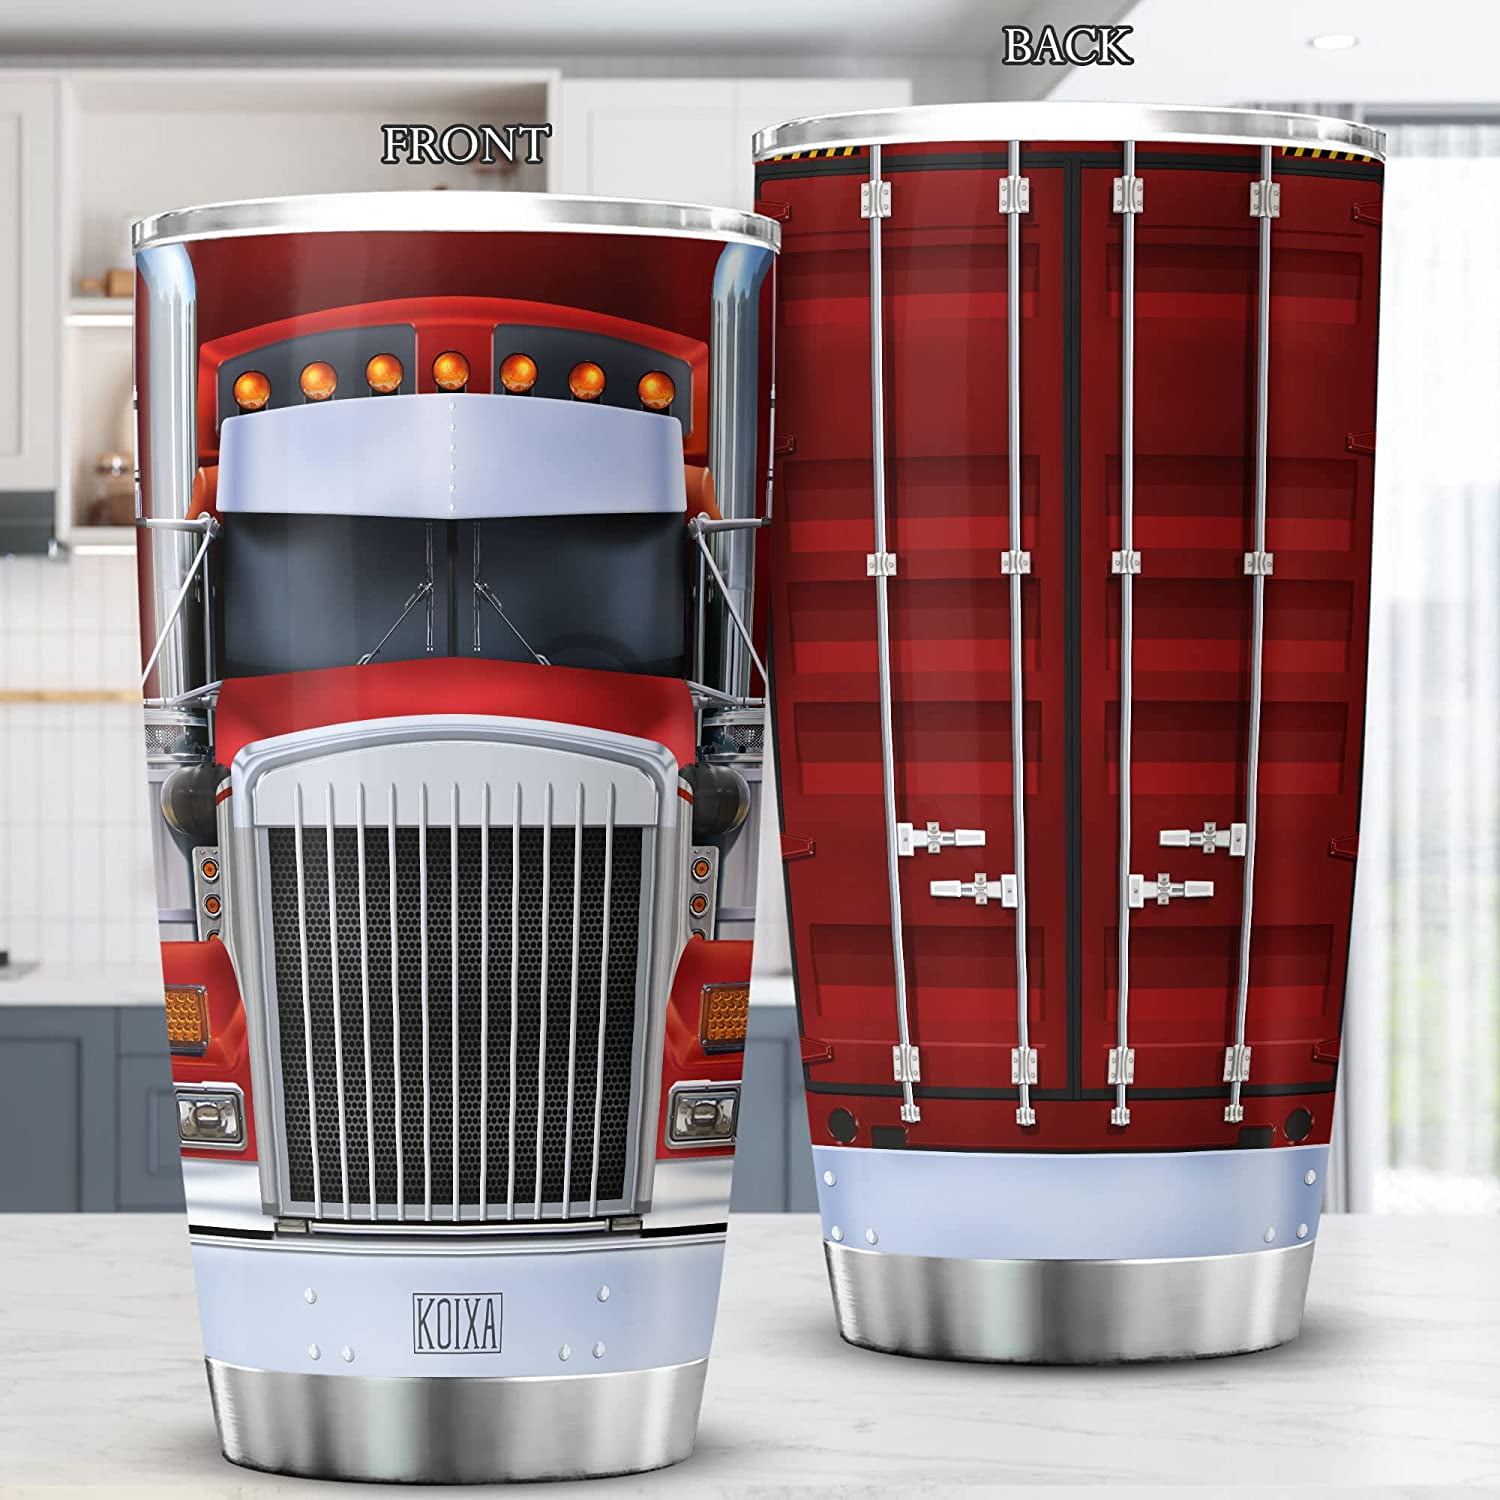 Truck Tumbler With Lid 20oz Novelty Trucking Accessories Stainless Steel  Coffee Mug Vintage Insulated Cup For Truckers Dad Husband Trucker Gifts For  Truck Driver Teamster 